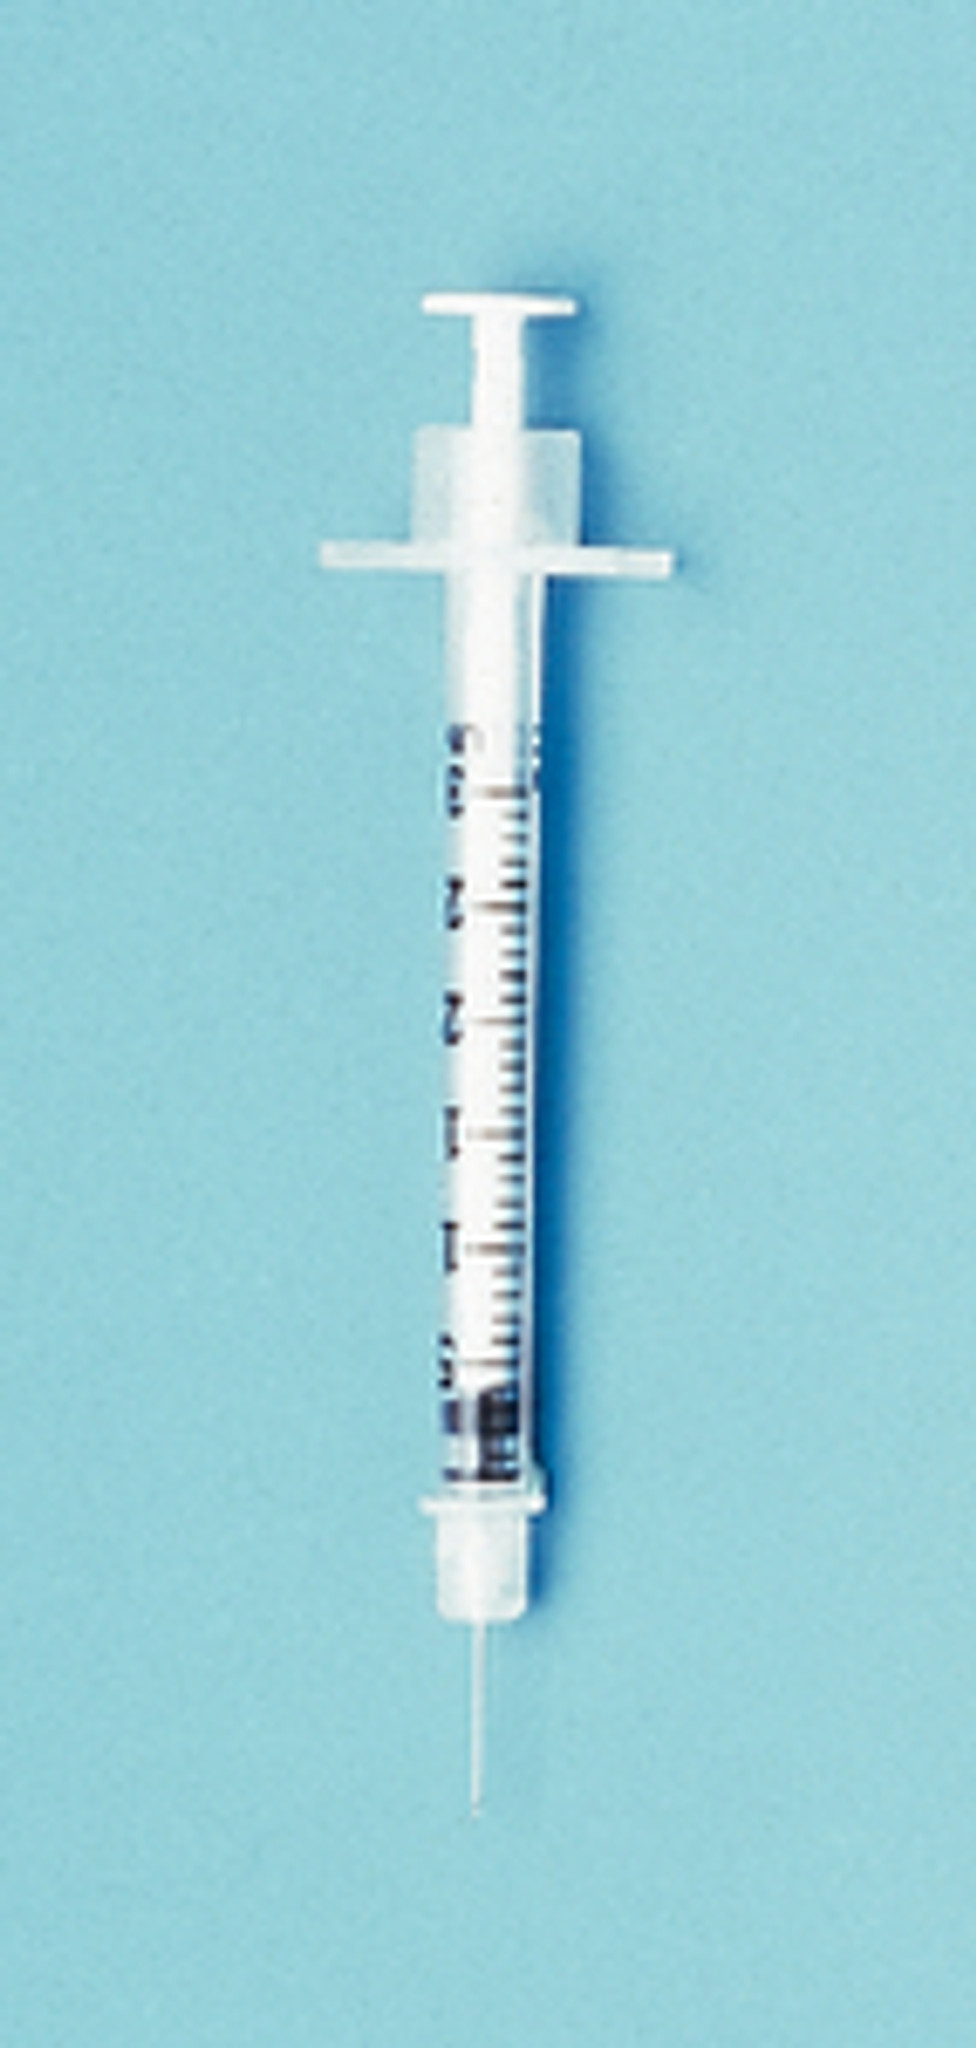 BD 1 ml 28 G x 1/2 in. Insulin Syringe with Permanent Needle - Delasco